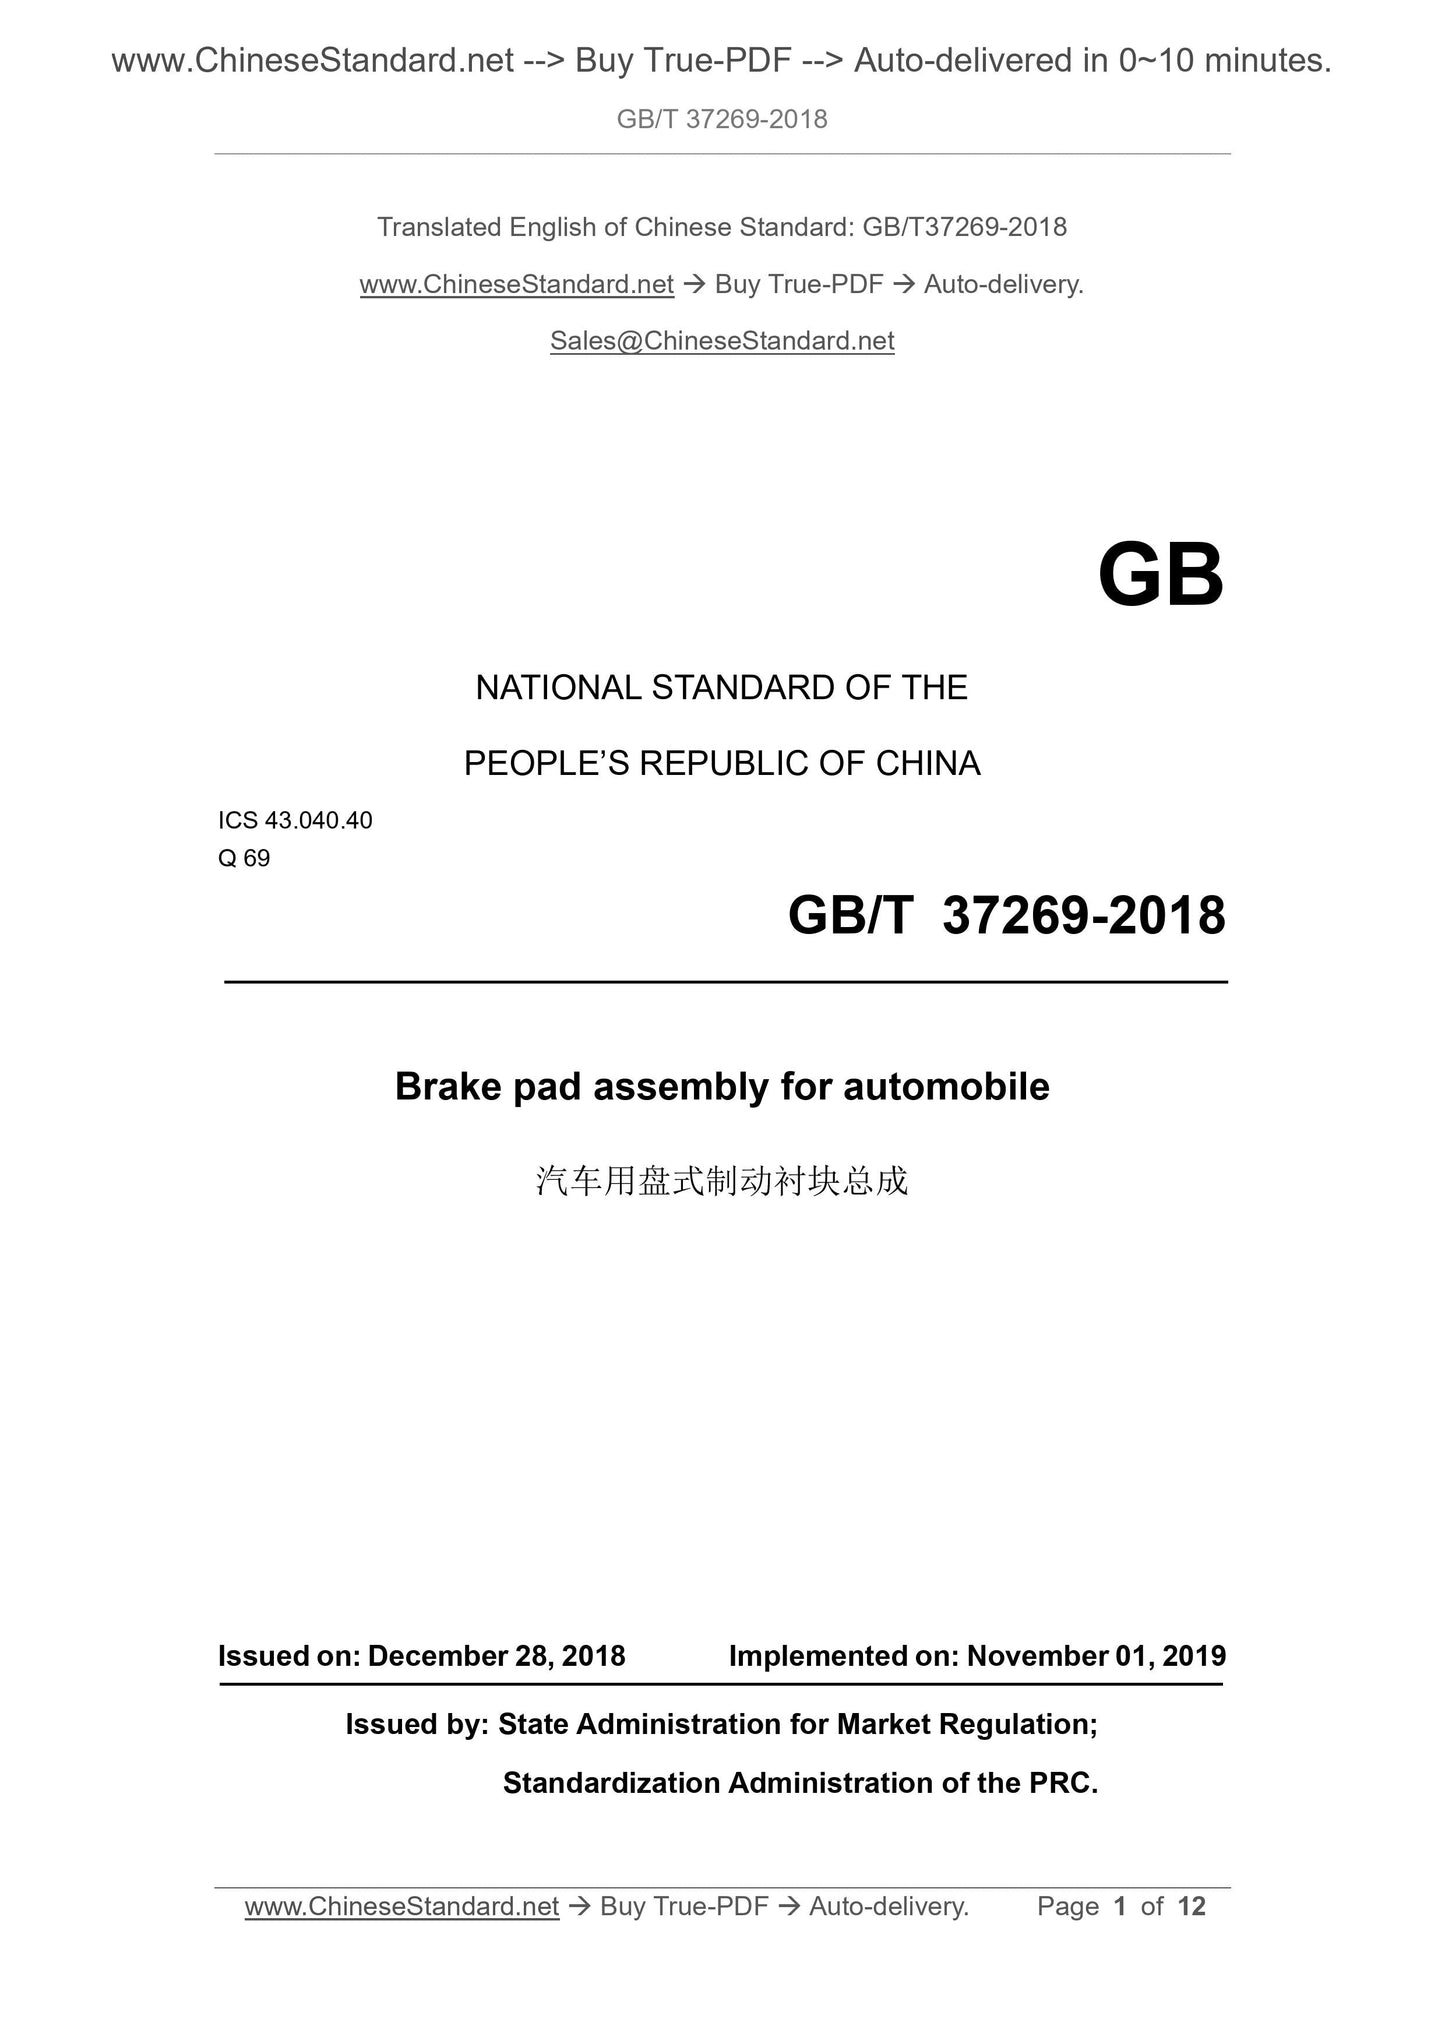 GB/T 37269-2018 Page 1